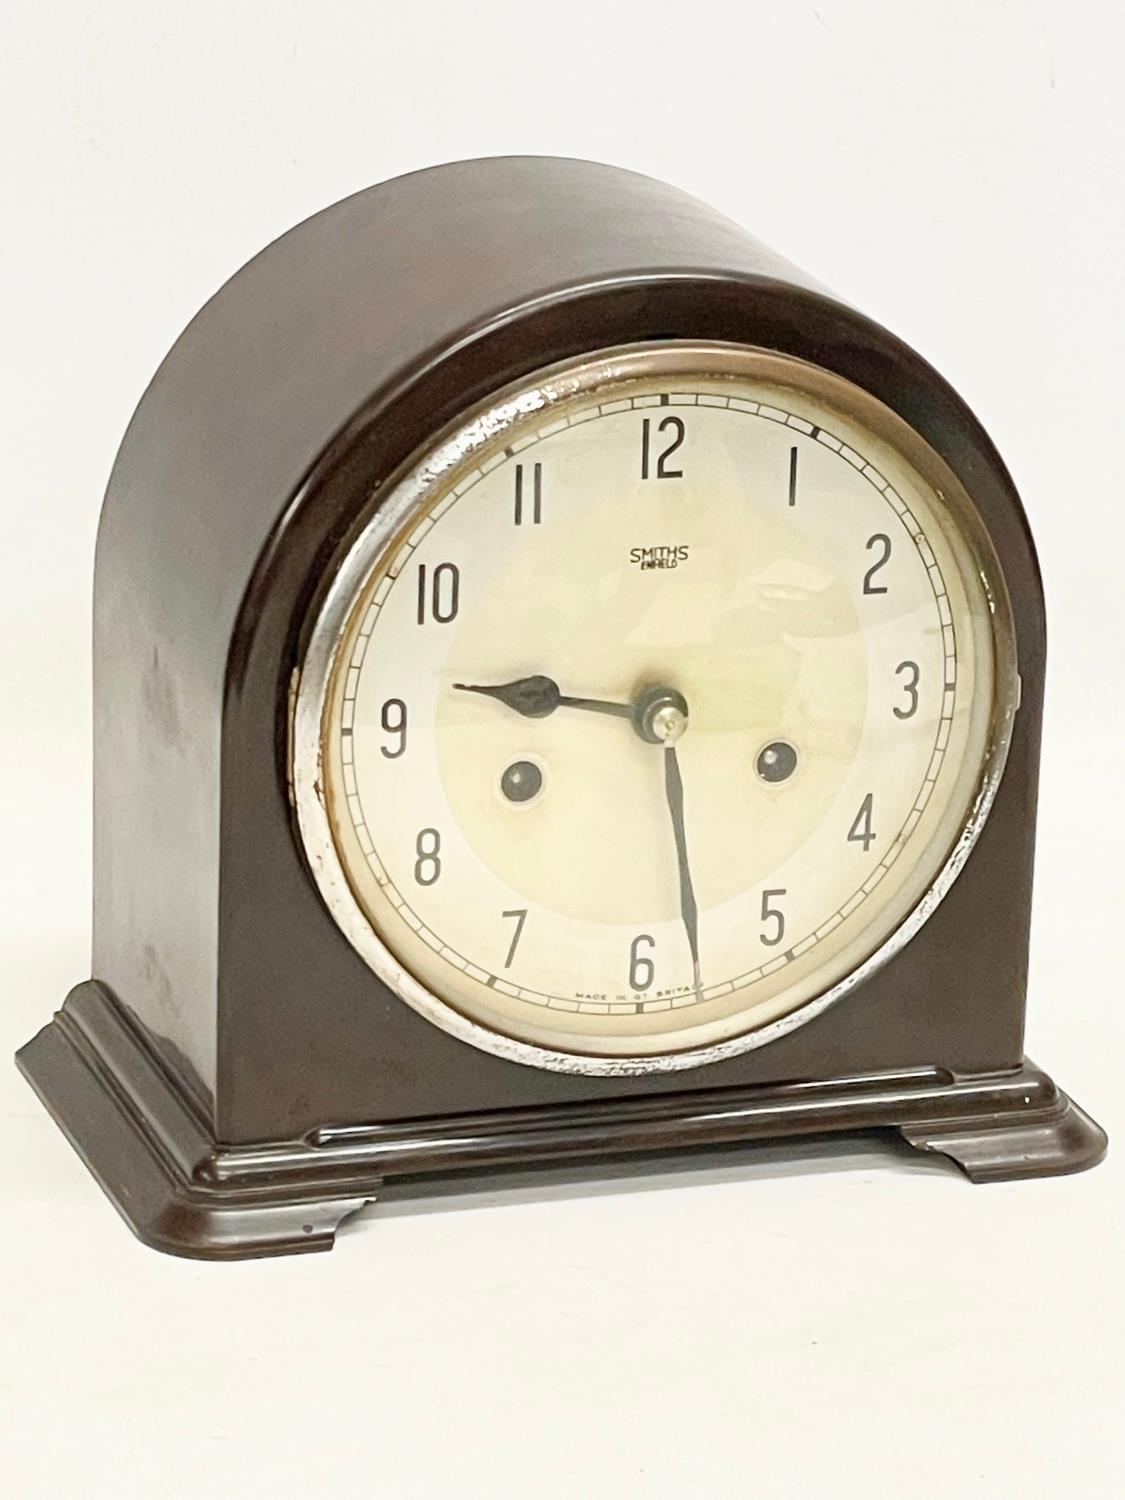 A vintage Art Deco Bakelite mantle clock by Smiths Enfield. With key and pendulum. 22x12x20cm - Image 3 of 6